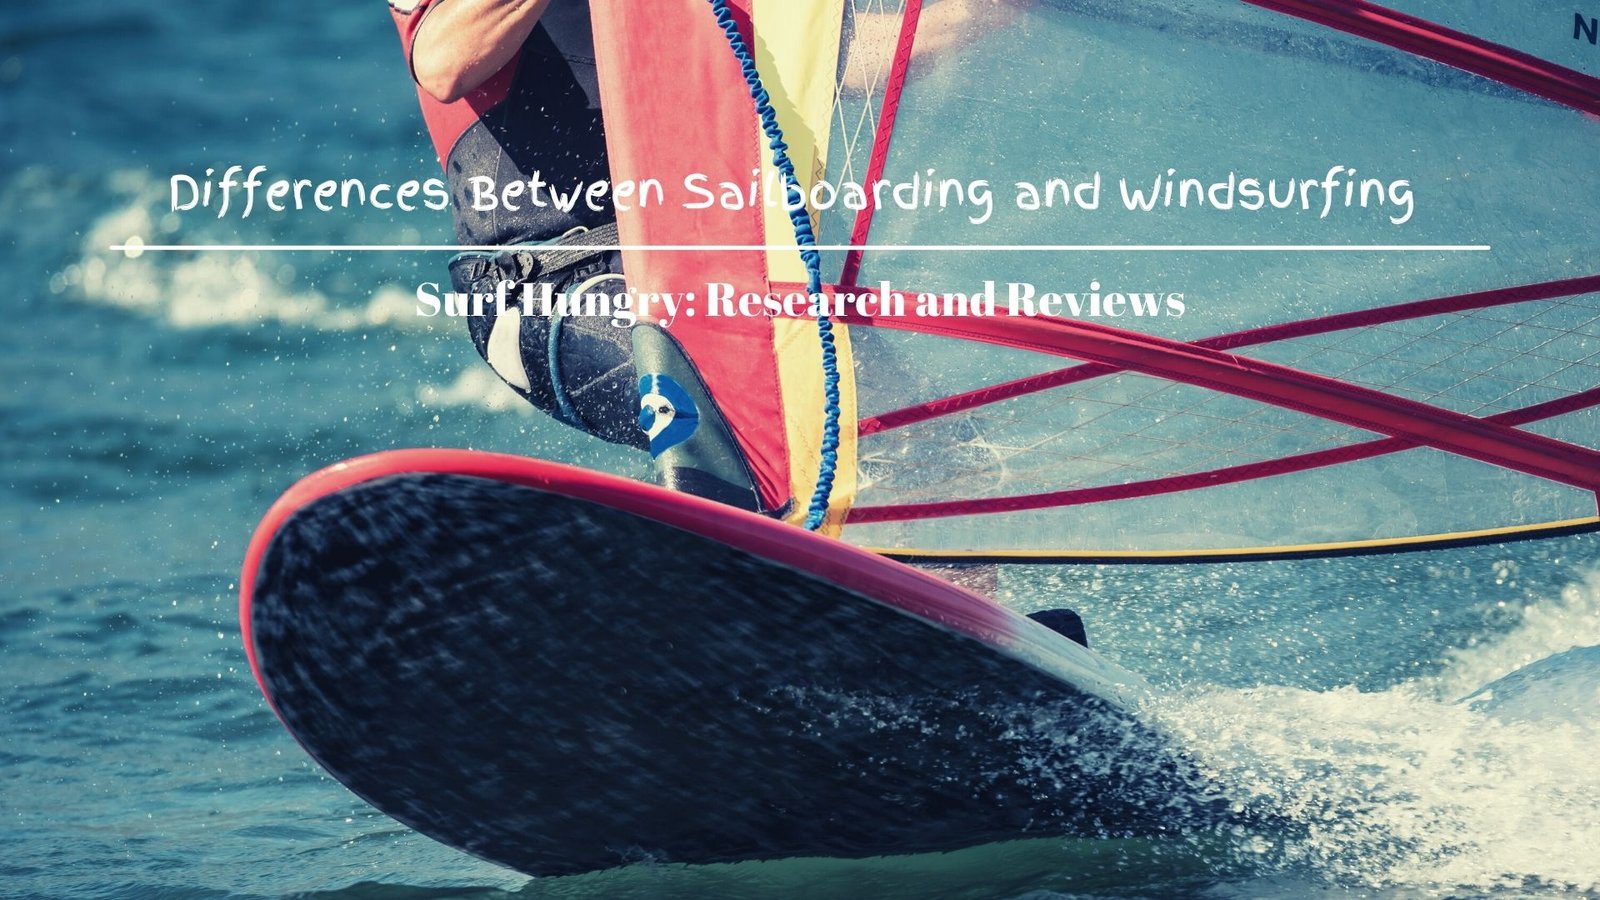 Differences Between Sailboarding and Windsurfing